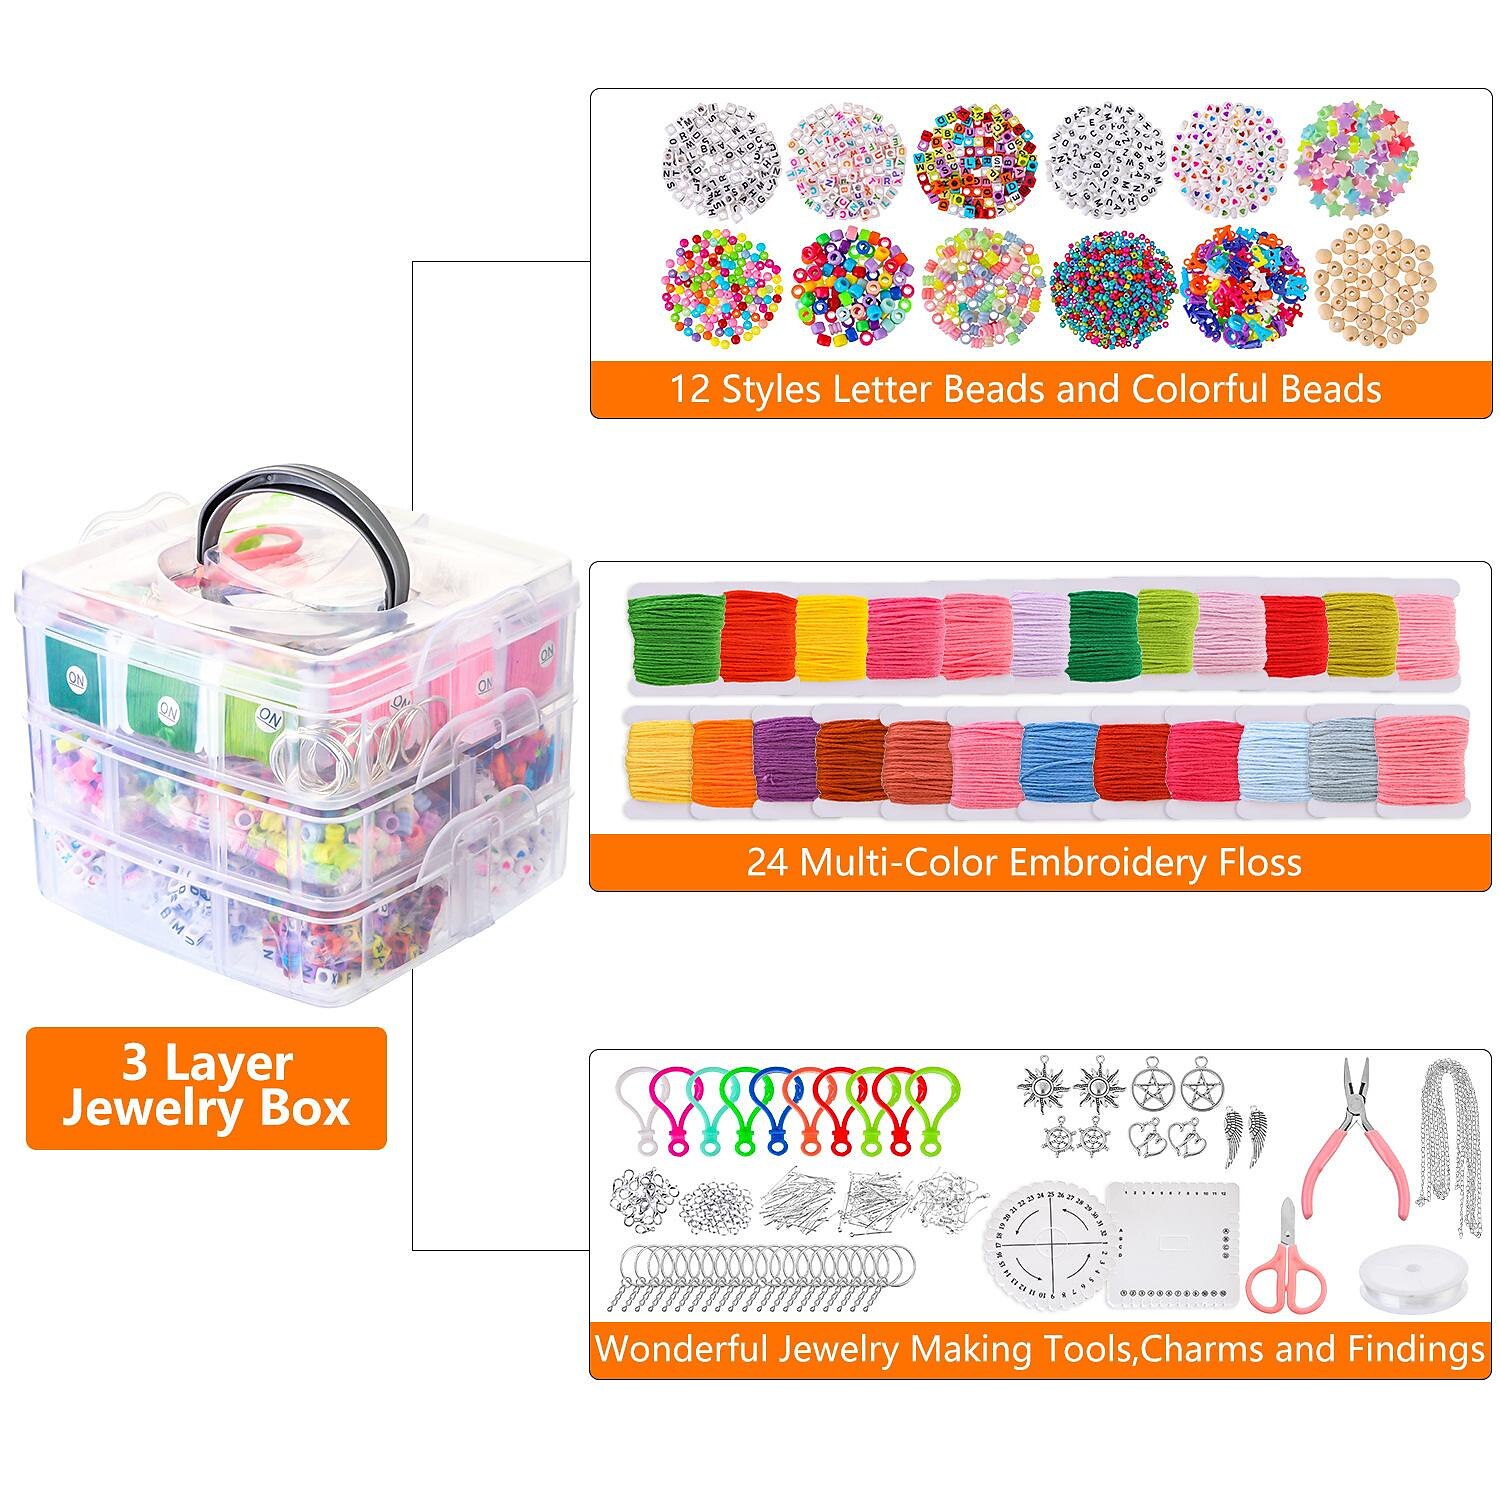 4655 pcs Jewelry Bracelet Making Kits Repair Tool Kits with Jewelry Pliers,  Making Supplies Kit, Jump rings, Beads, Beading Wire,Storage Case,Findings  and Charm…